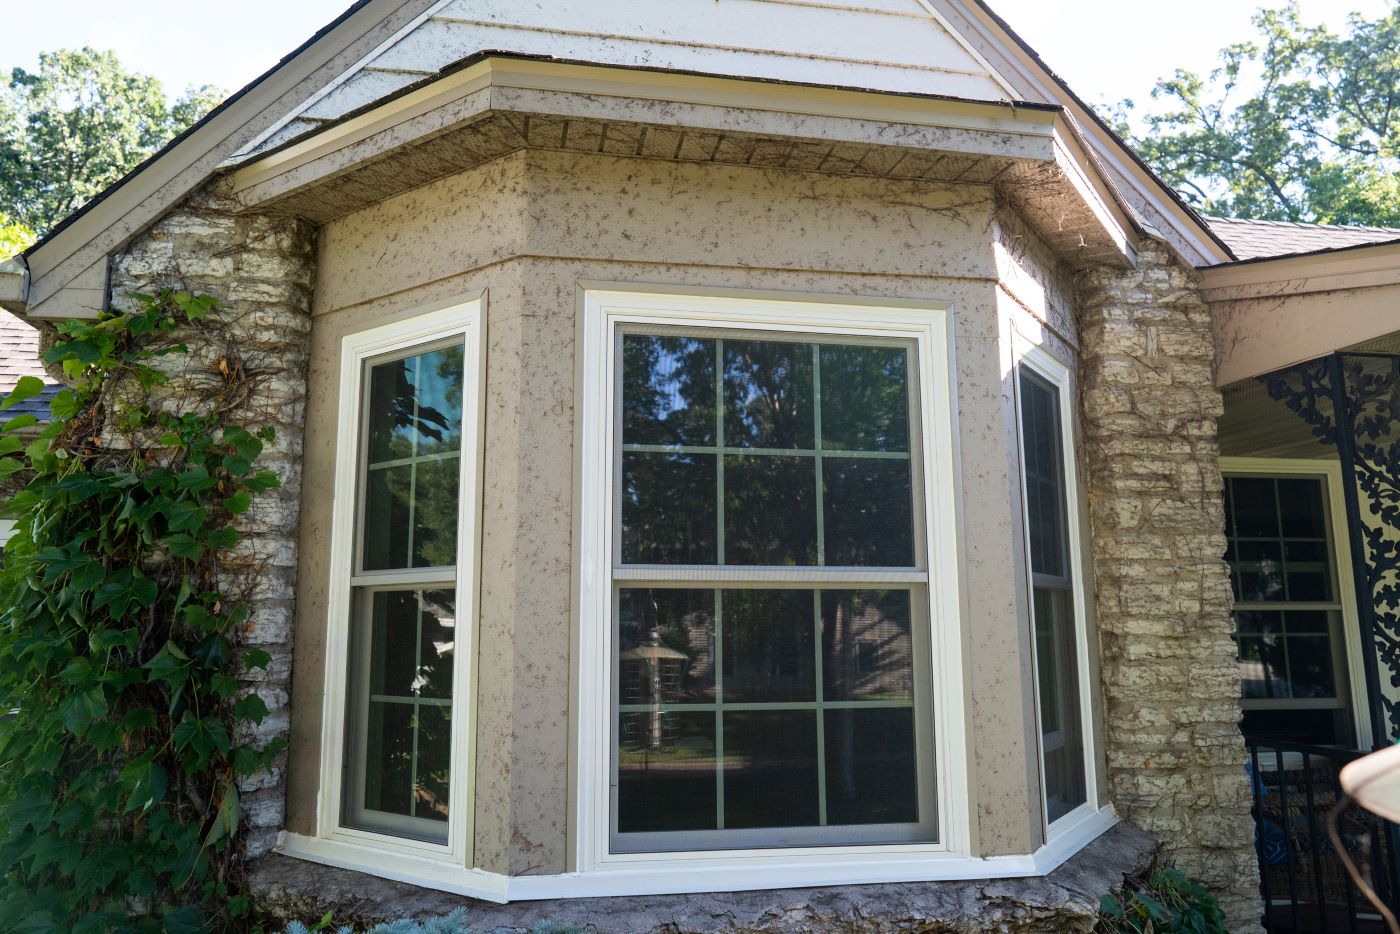 Double hung windows with grilles in a home